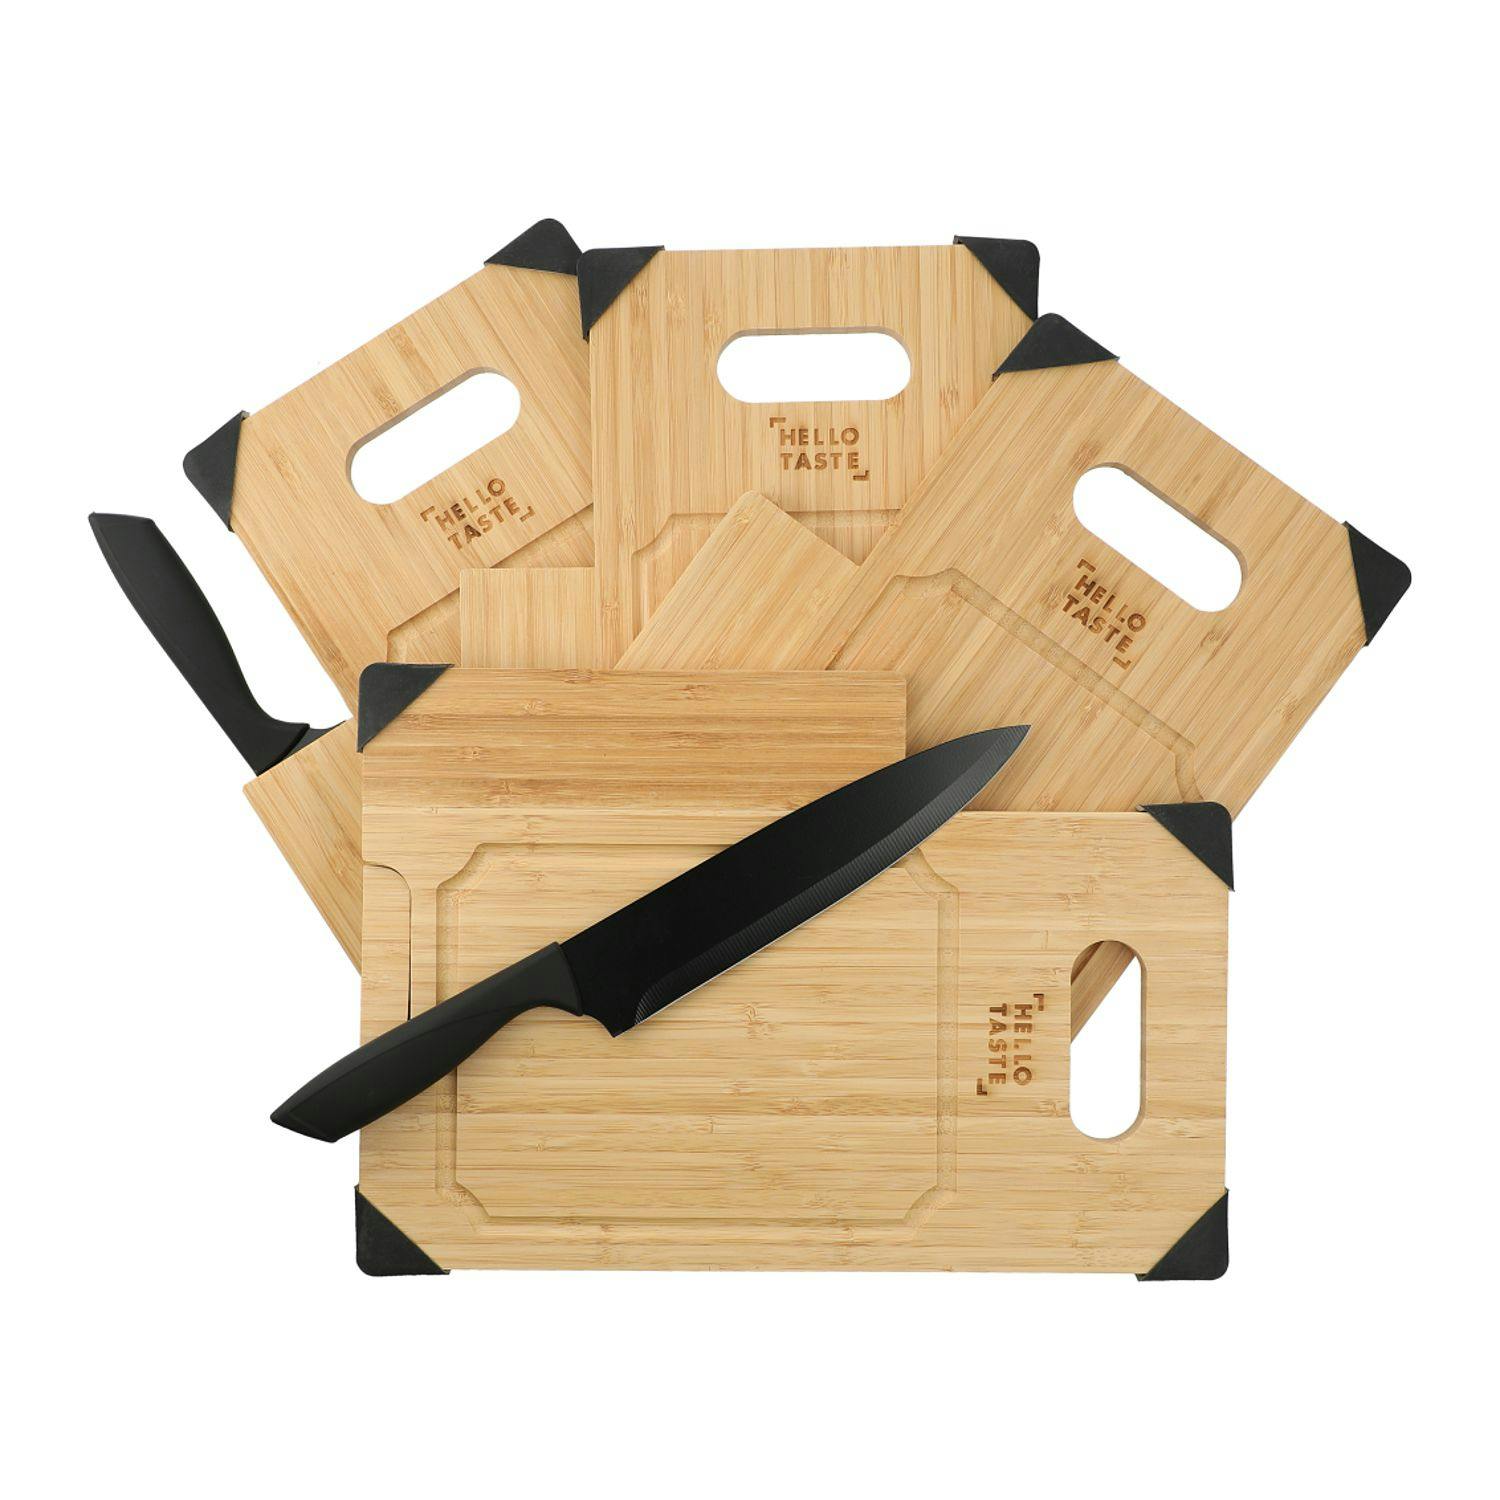 Bamboo Cutting Board with Knife - additional Image 1